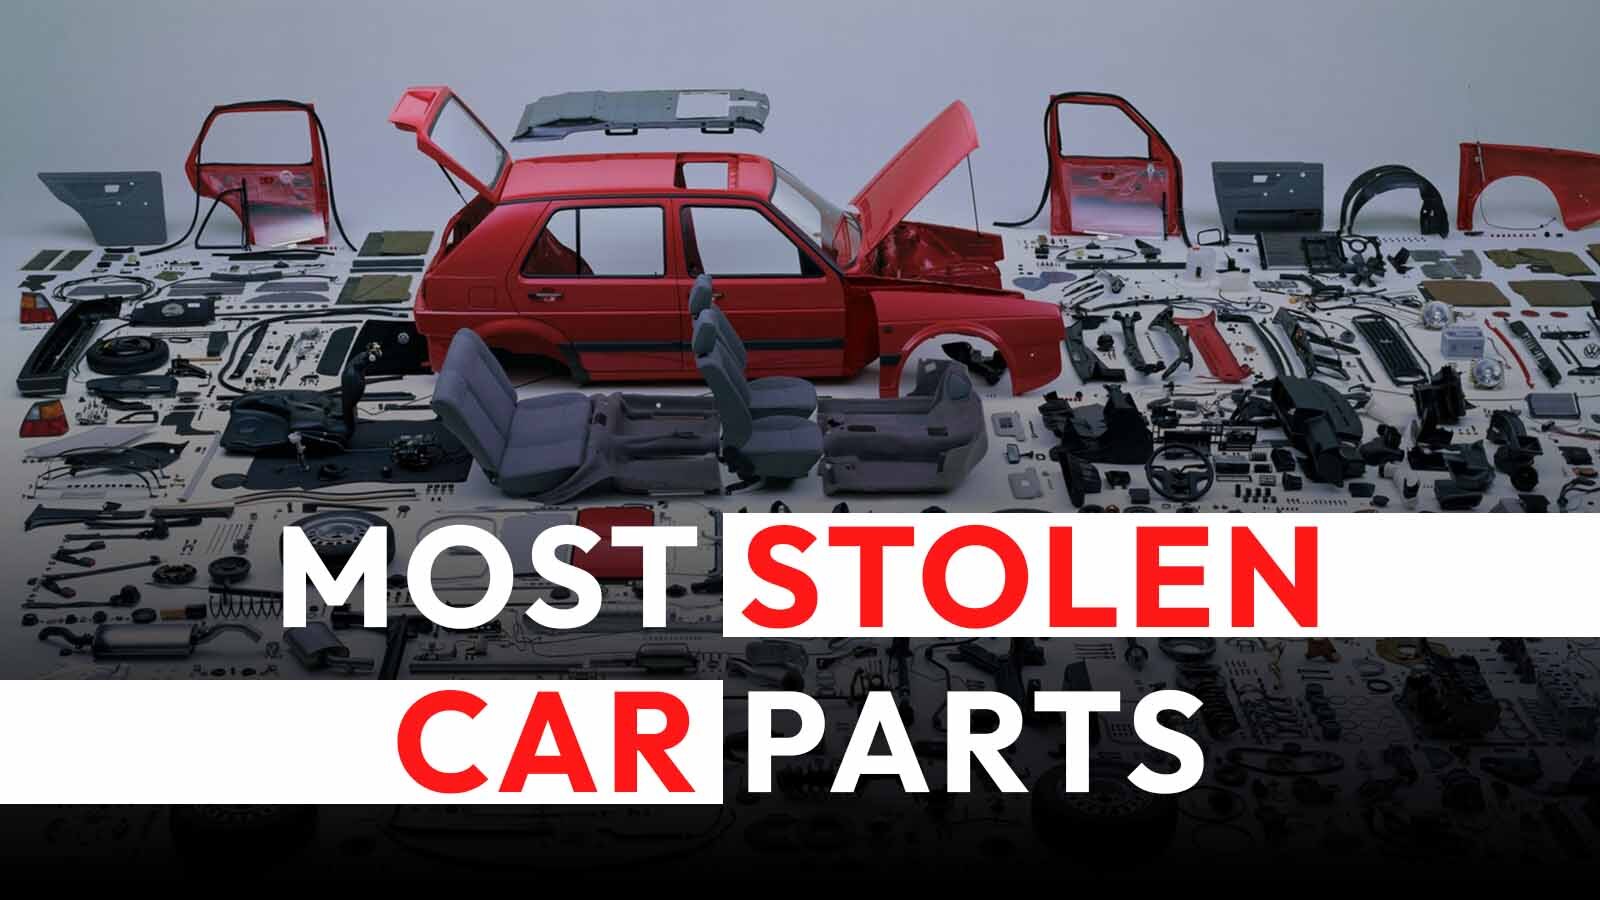 Catalytic Converter Theft: Why 1 in 5.8 BMW Cars Are Being Targeted